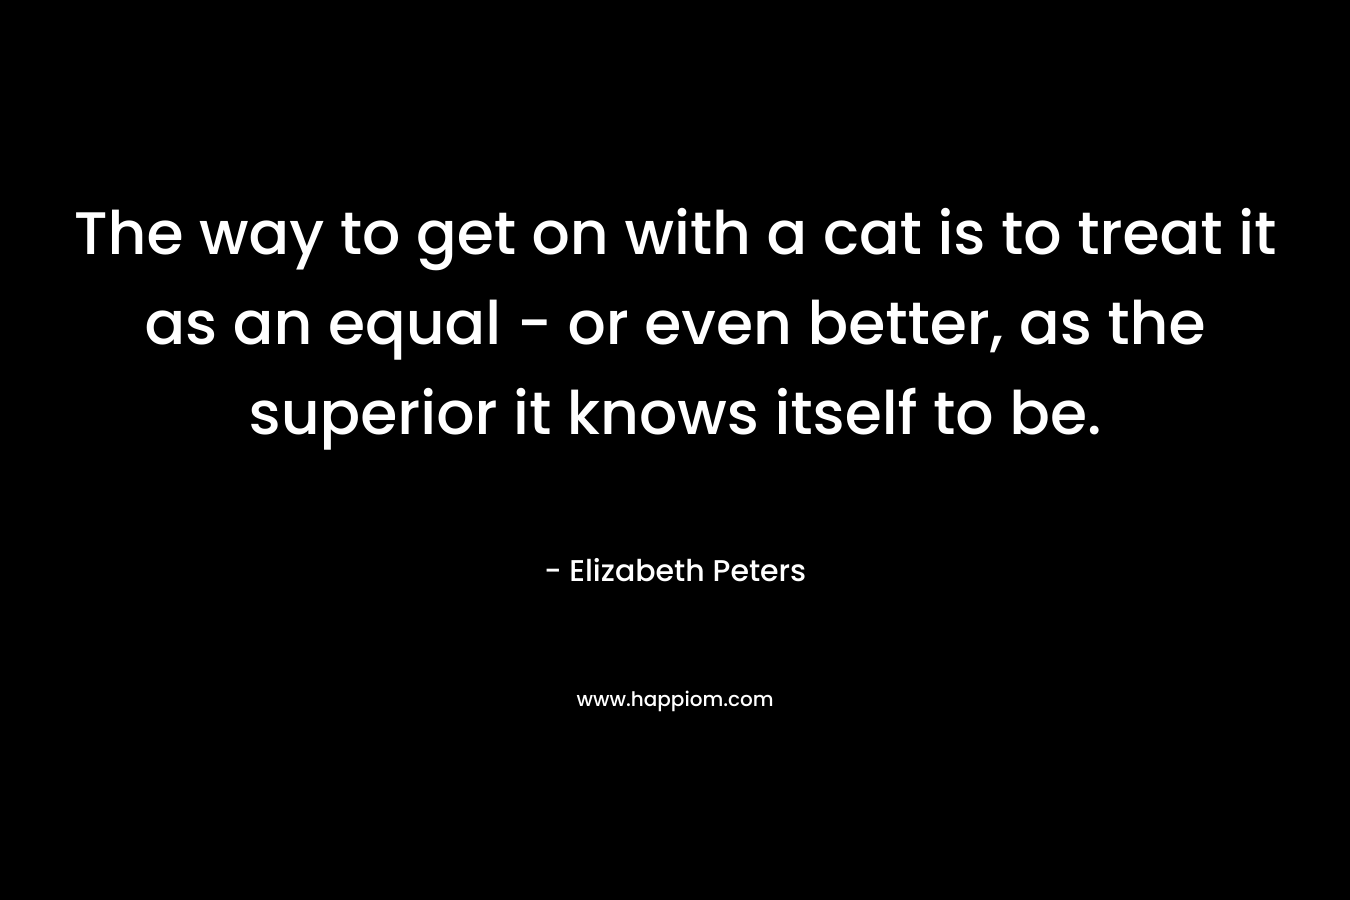 The way to get on with a cat is to treat it as an equal – or even better, as the superior it knows itself to be. – Elizabeth Peters